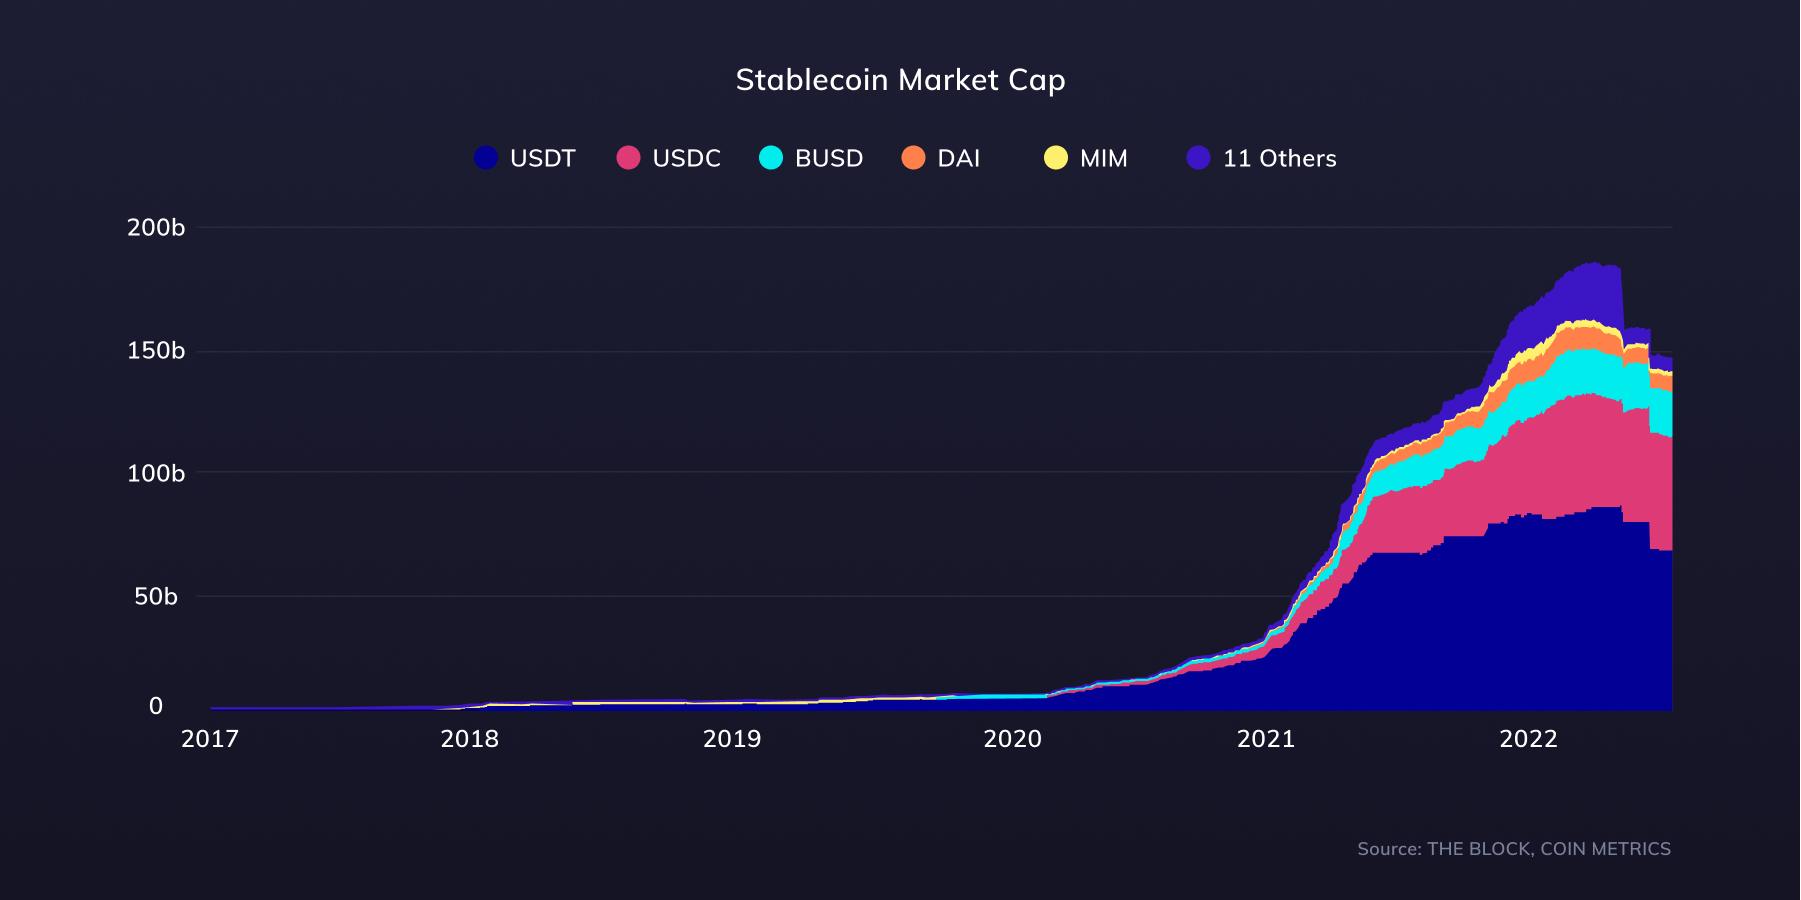 Stablecoins are cryptocurrencies that are collateralized by fiat money, commodities or other cryptocurrencies and have reached a record high market capitalization of over $180B in 2022. Even during the bear market, stablecoin market capitalization has remained around $150B and has retained over 15% of the market share of the total digital currency market as of July 2022. The rapid growth of digital currency assets such as stablecoins has motivated central banks to research and validate Central Bank Digital Currency (CBDC) solutions.